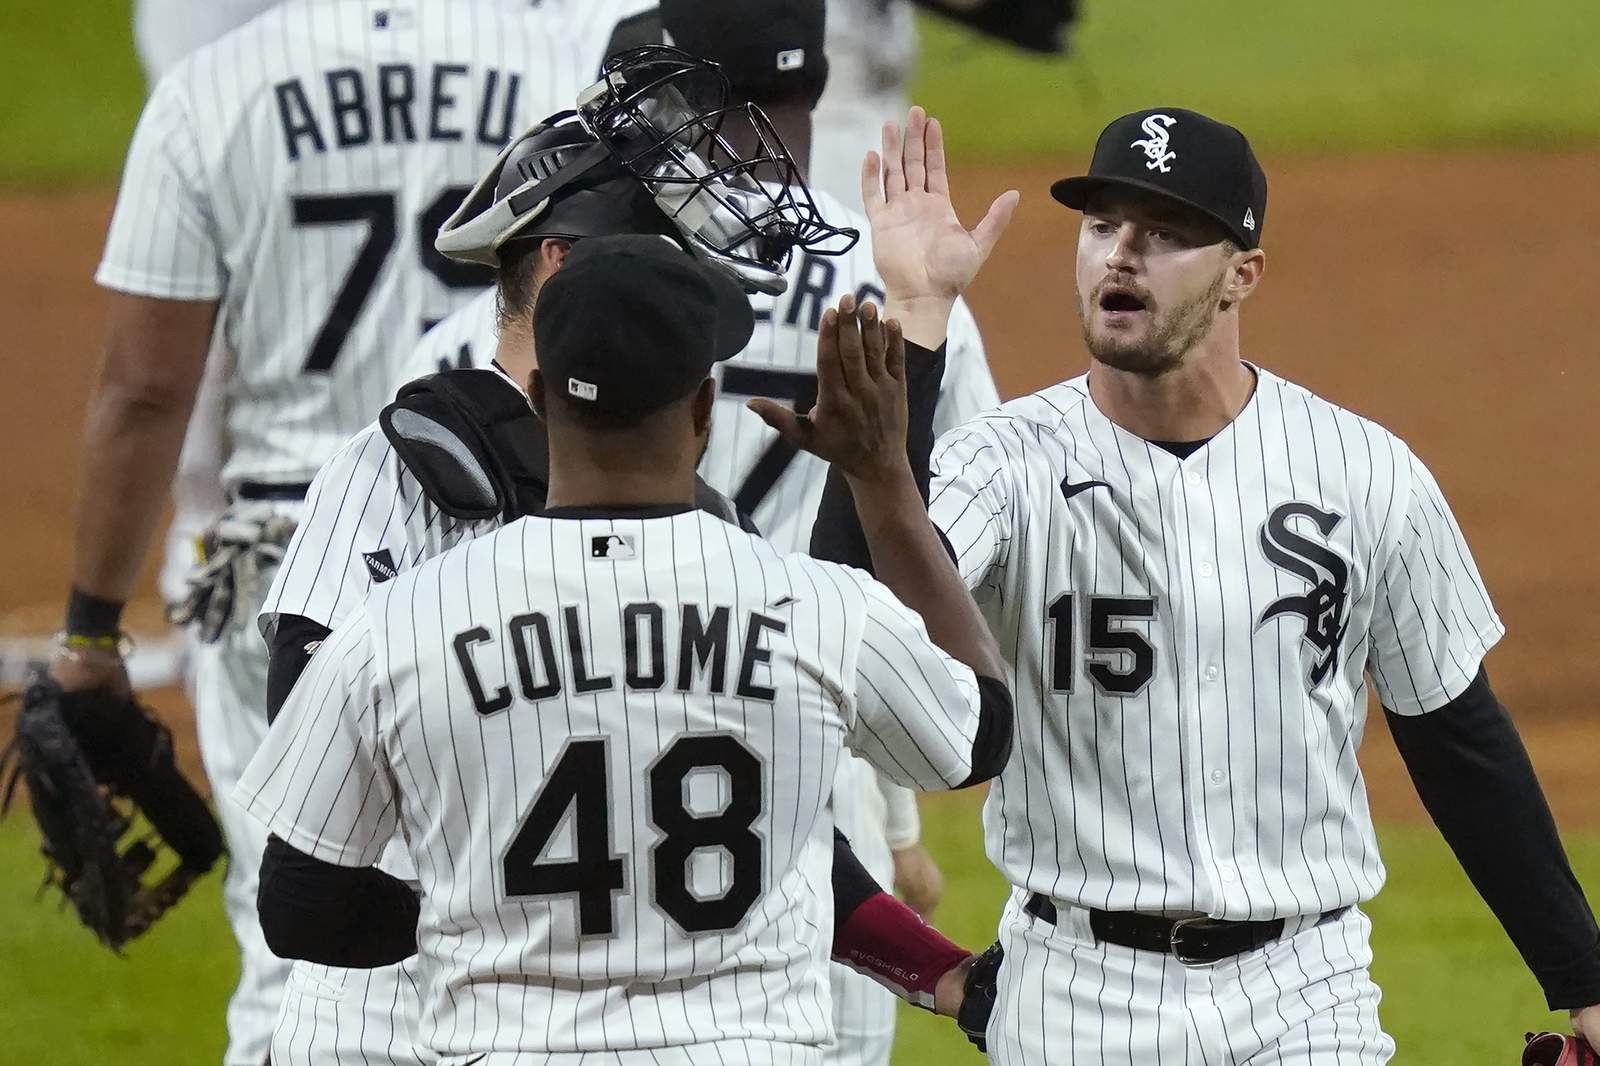 Engel gets big hit as White Sox top Twins 3-1